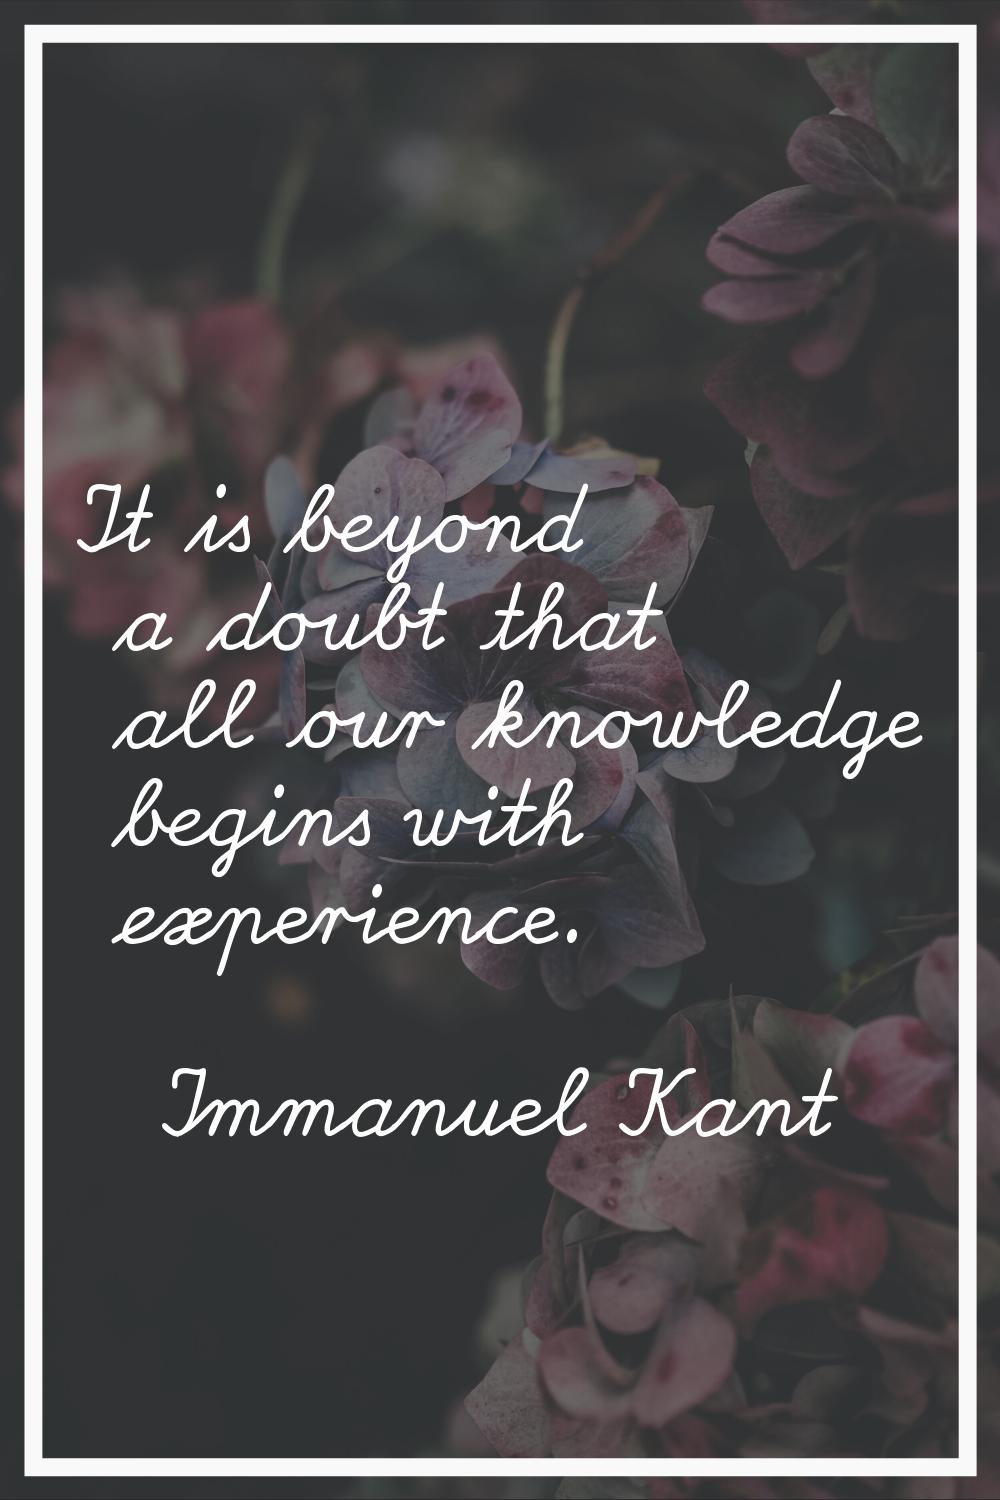 It is beyond a doubt that all our knowledge begins with experience.